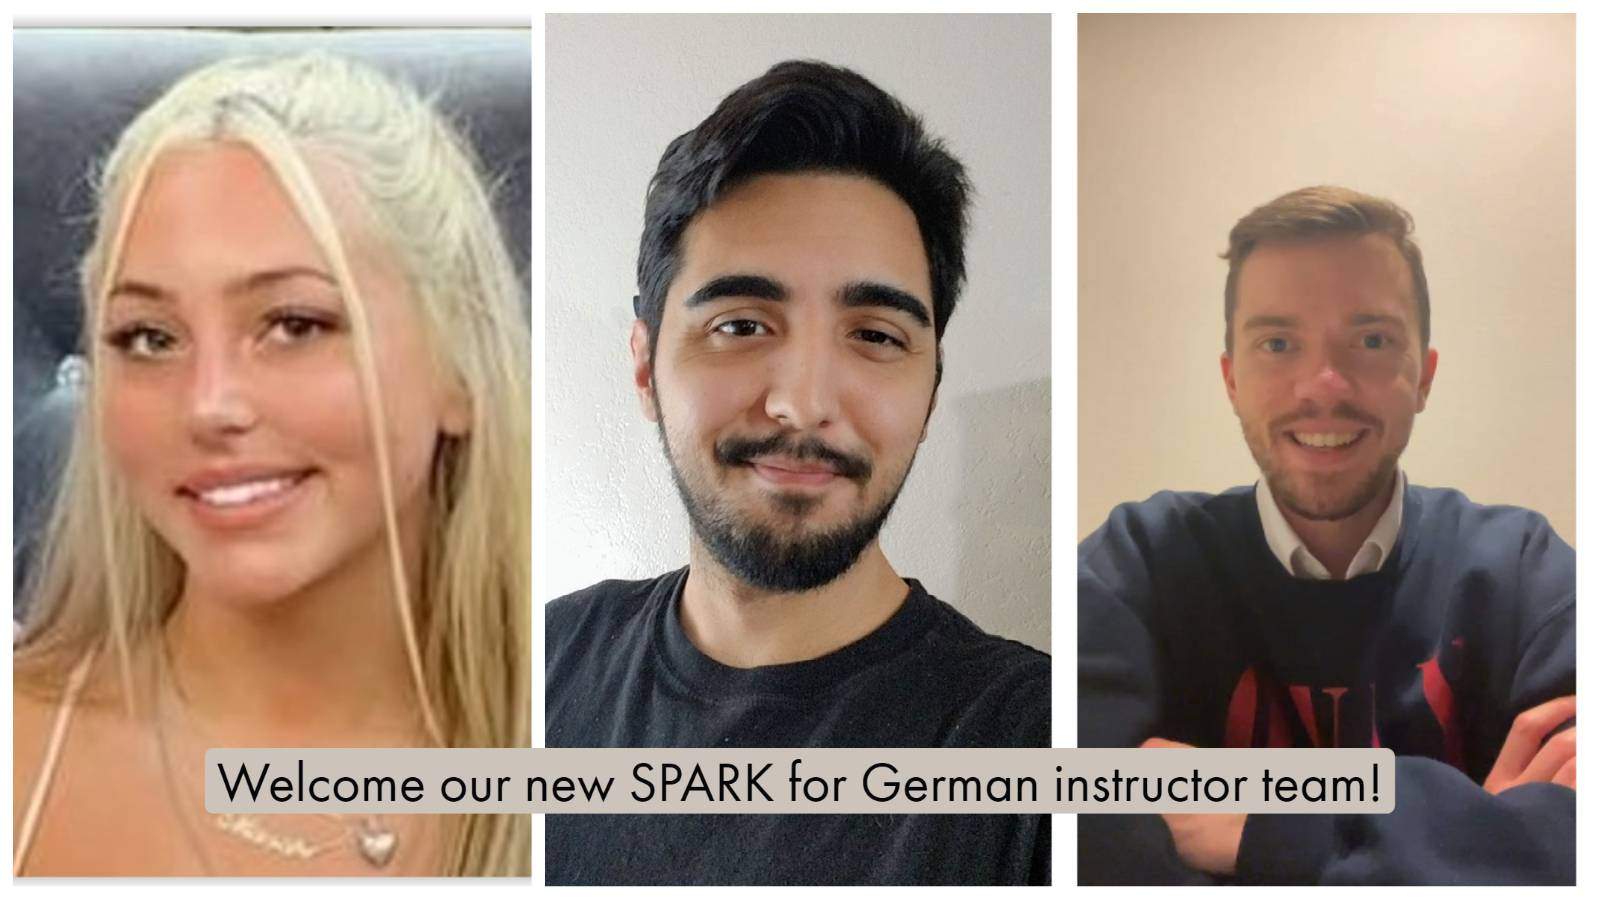 Image: one woman, two men. Text: Welcome our new SPARK for German instructor team!